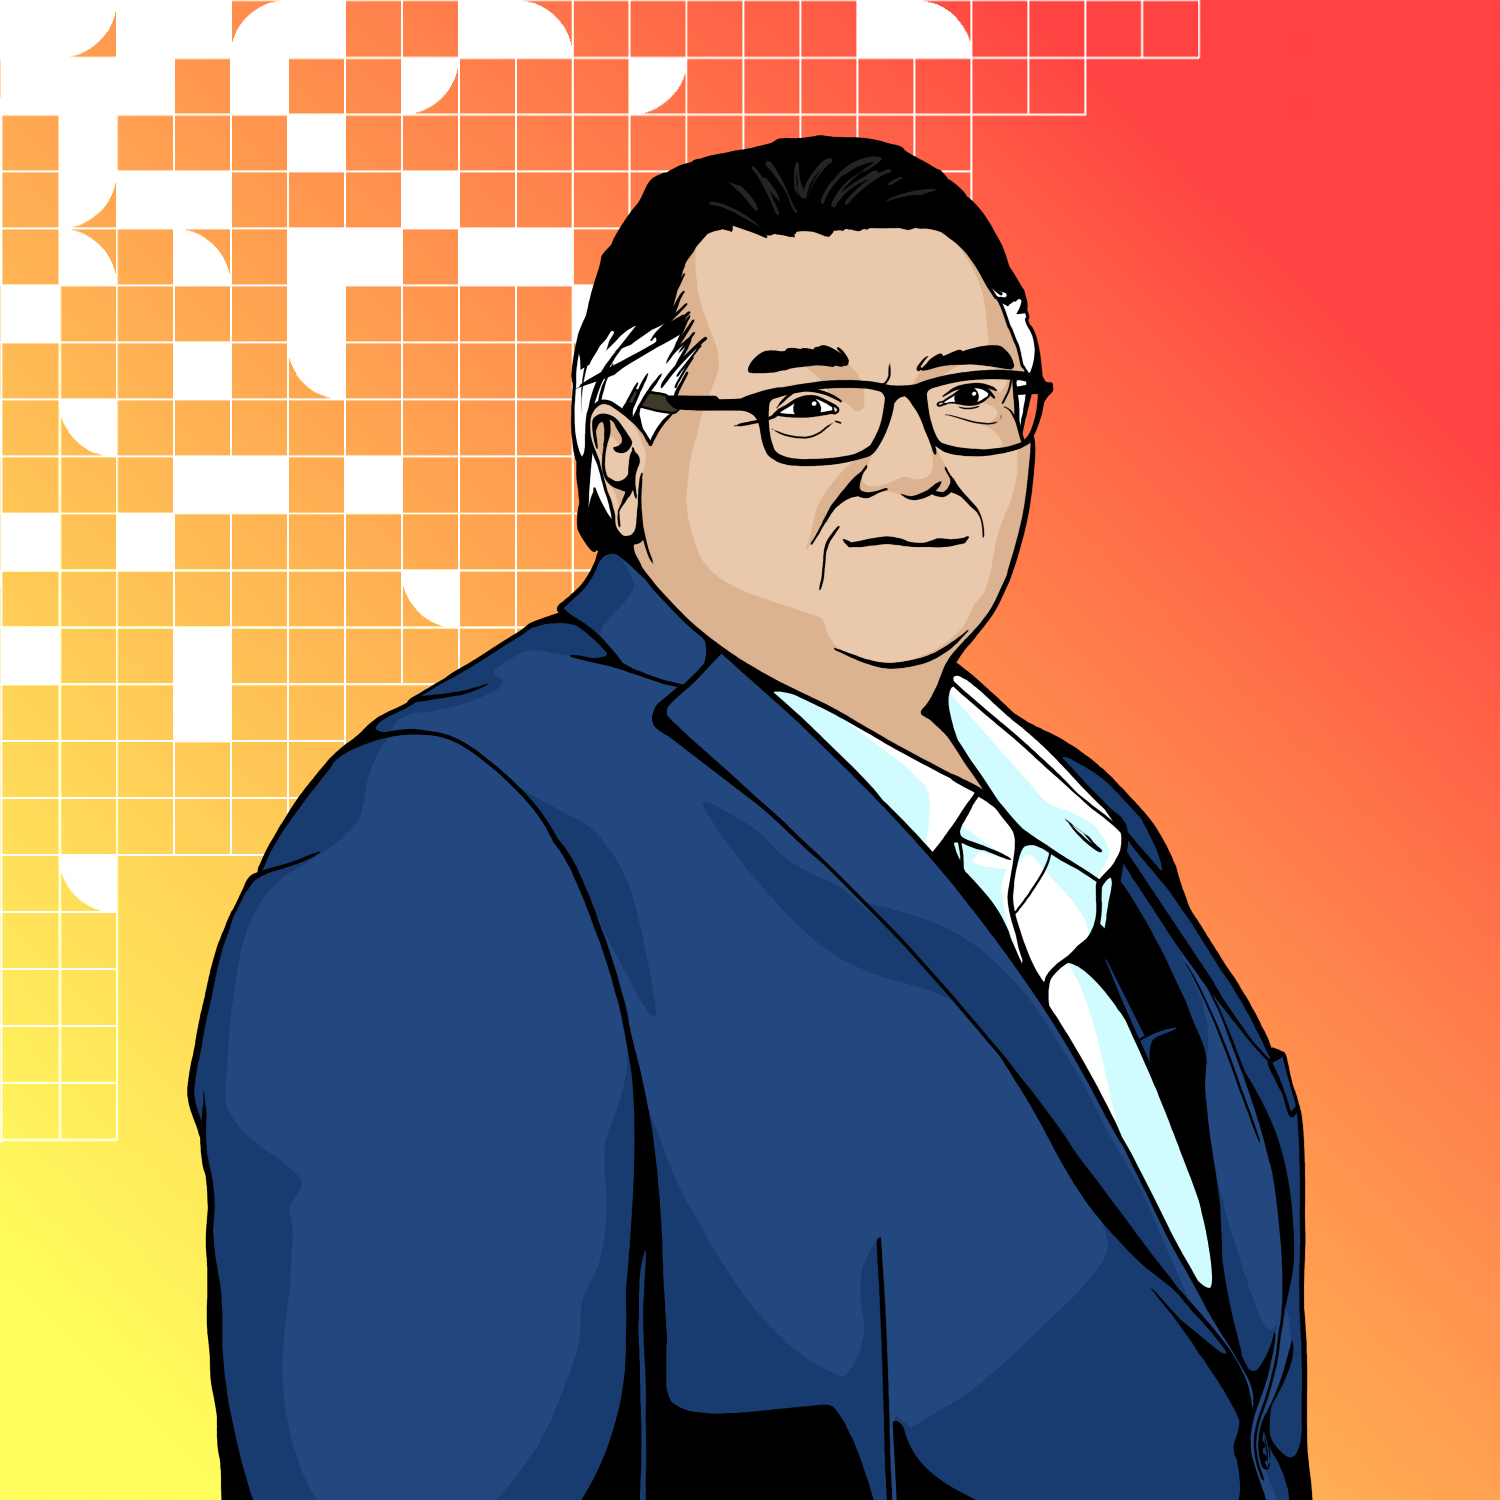 An illustration of Liithos VP of Creative, John Garvin, wearing a suit.